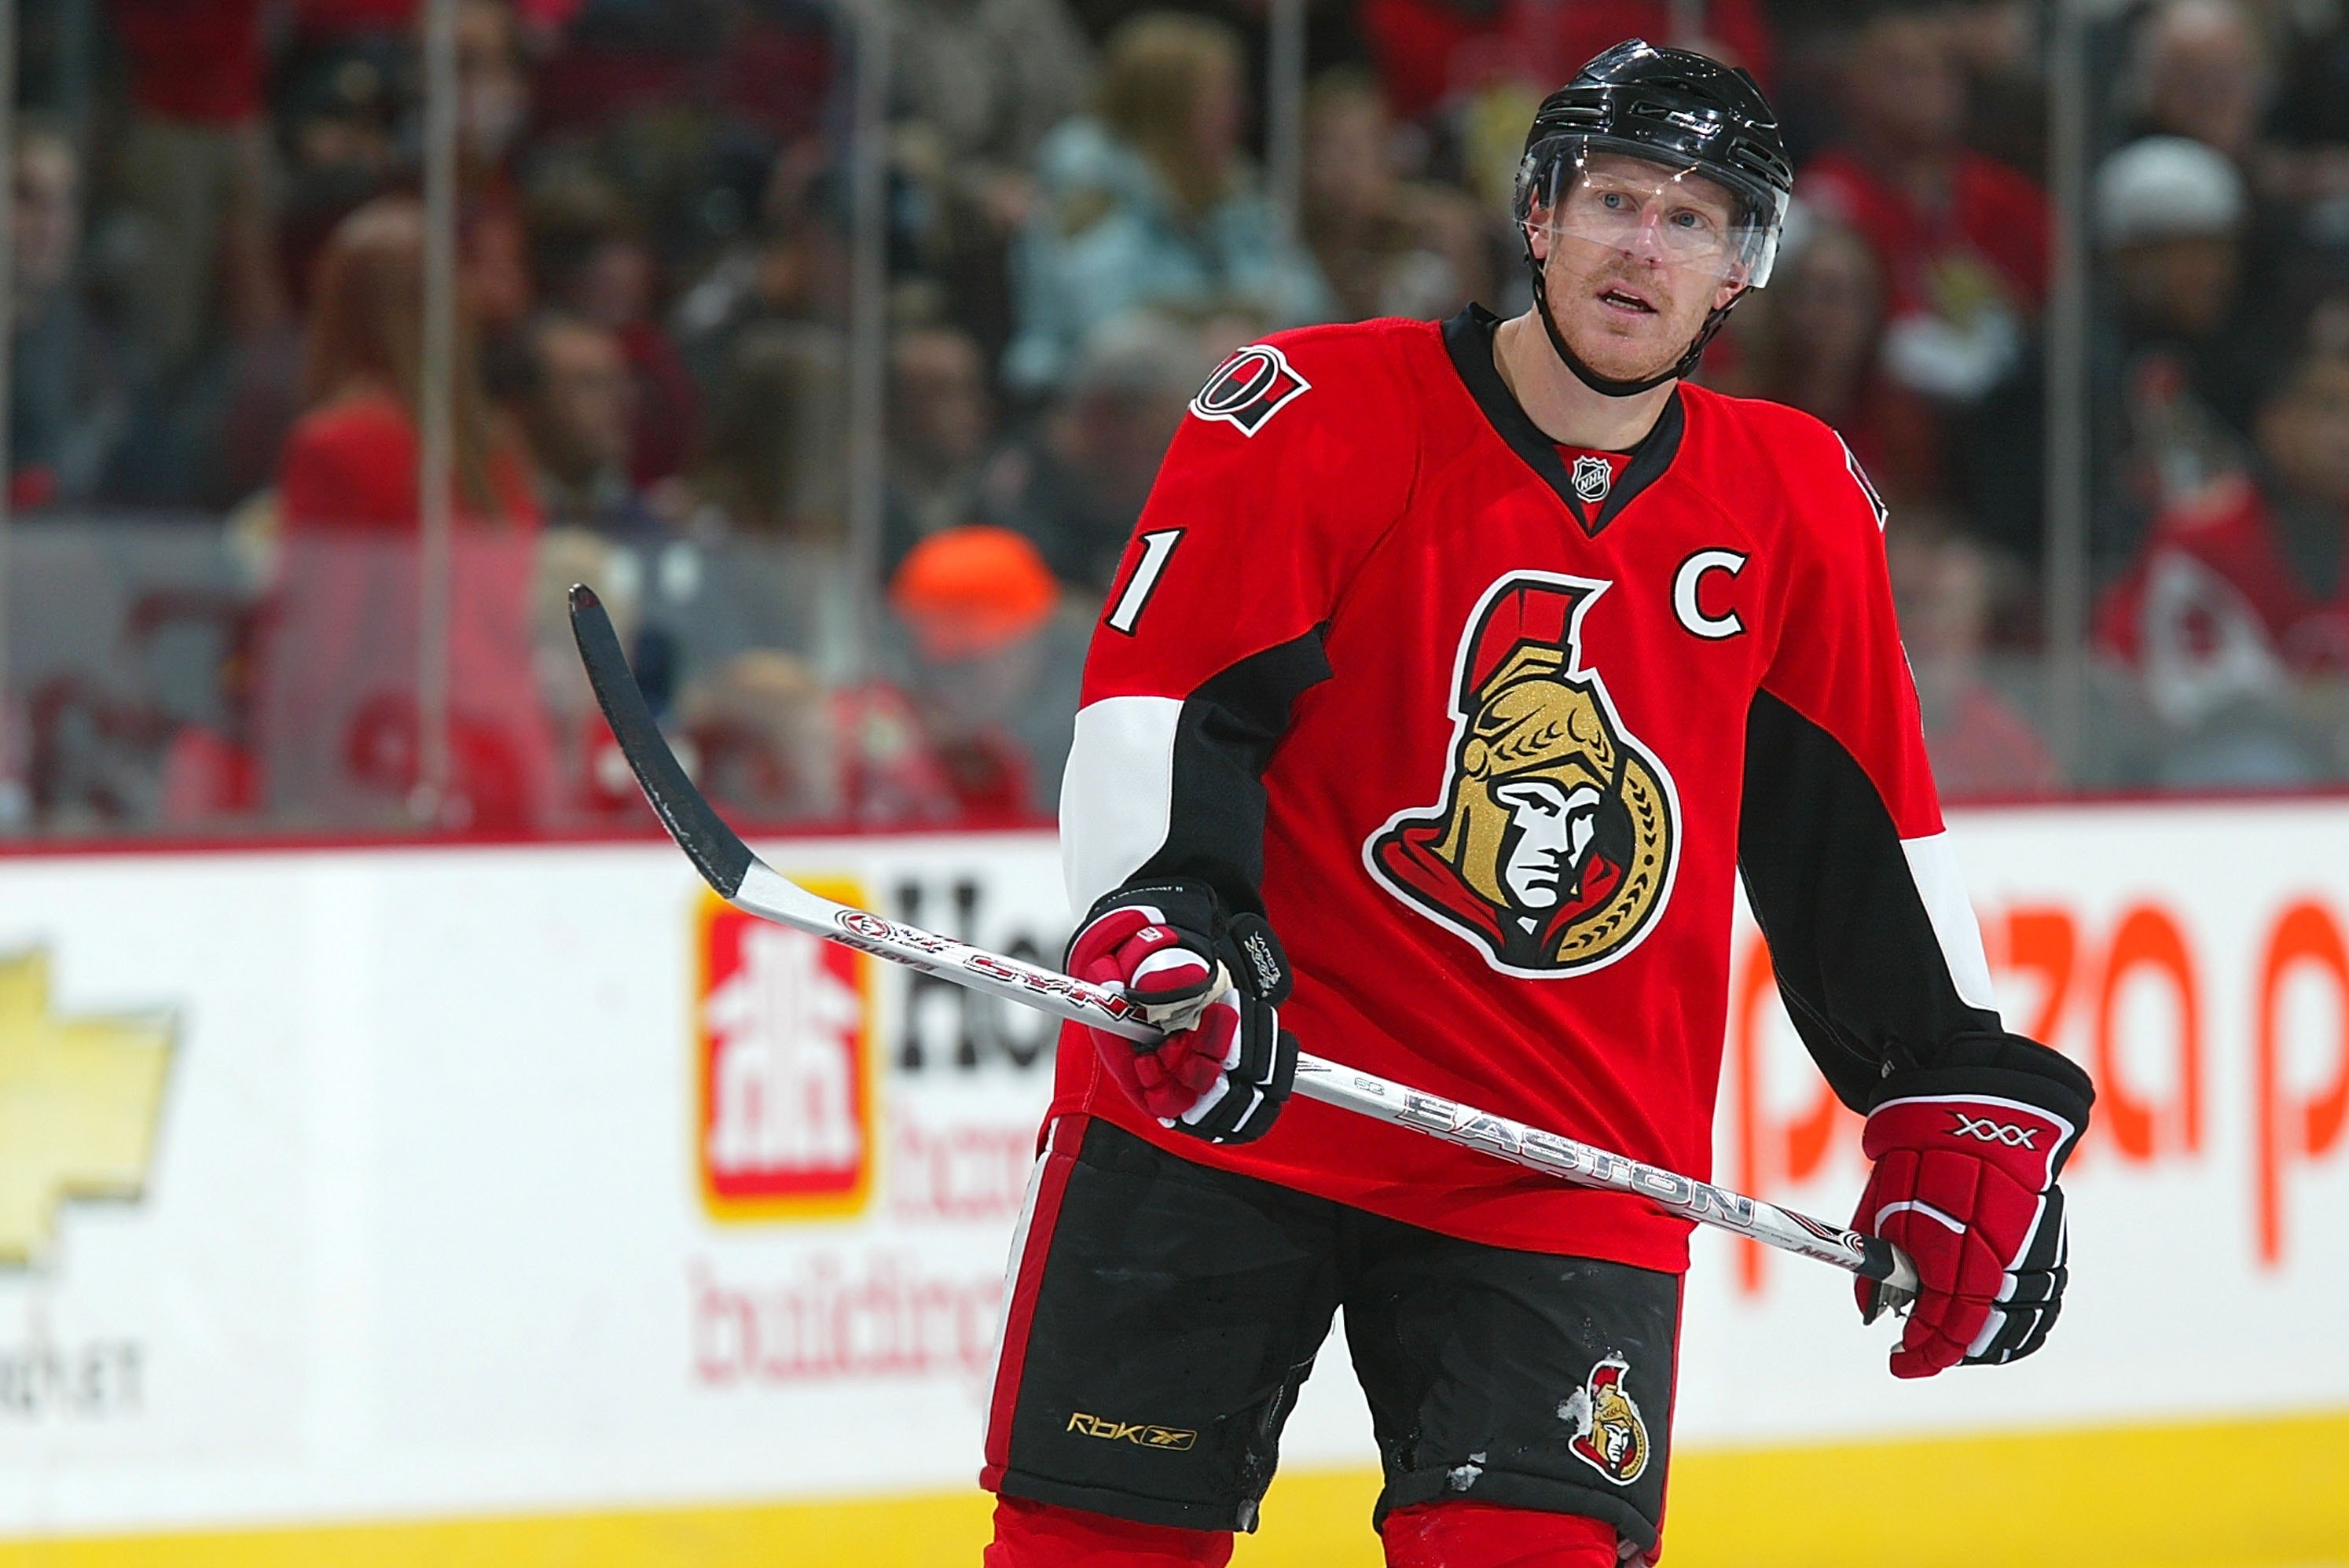 Alfredsson left front-office job with Senators 'to be a stay-at